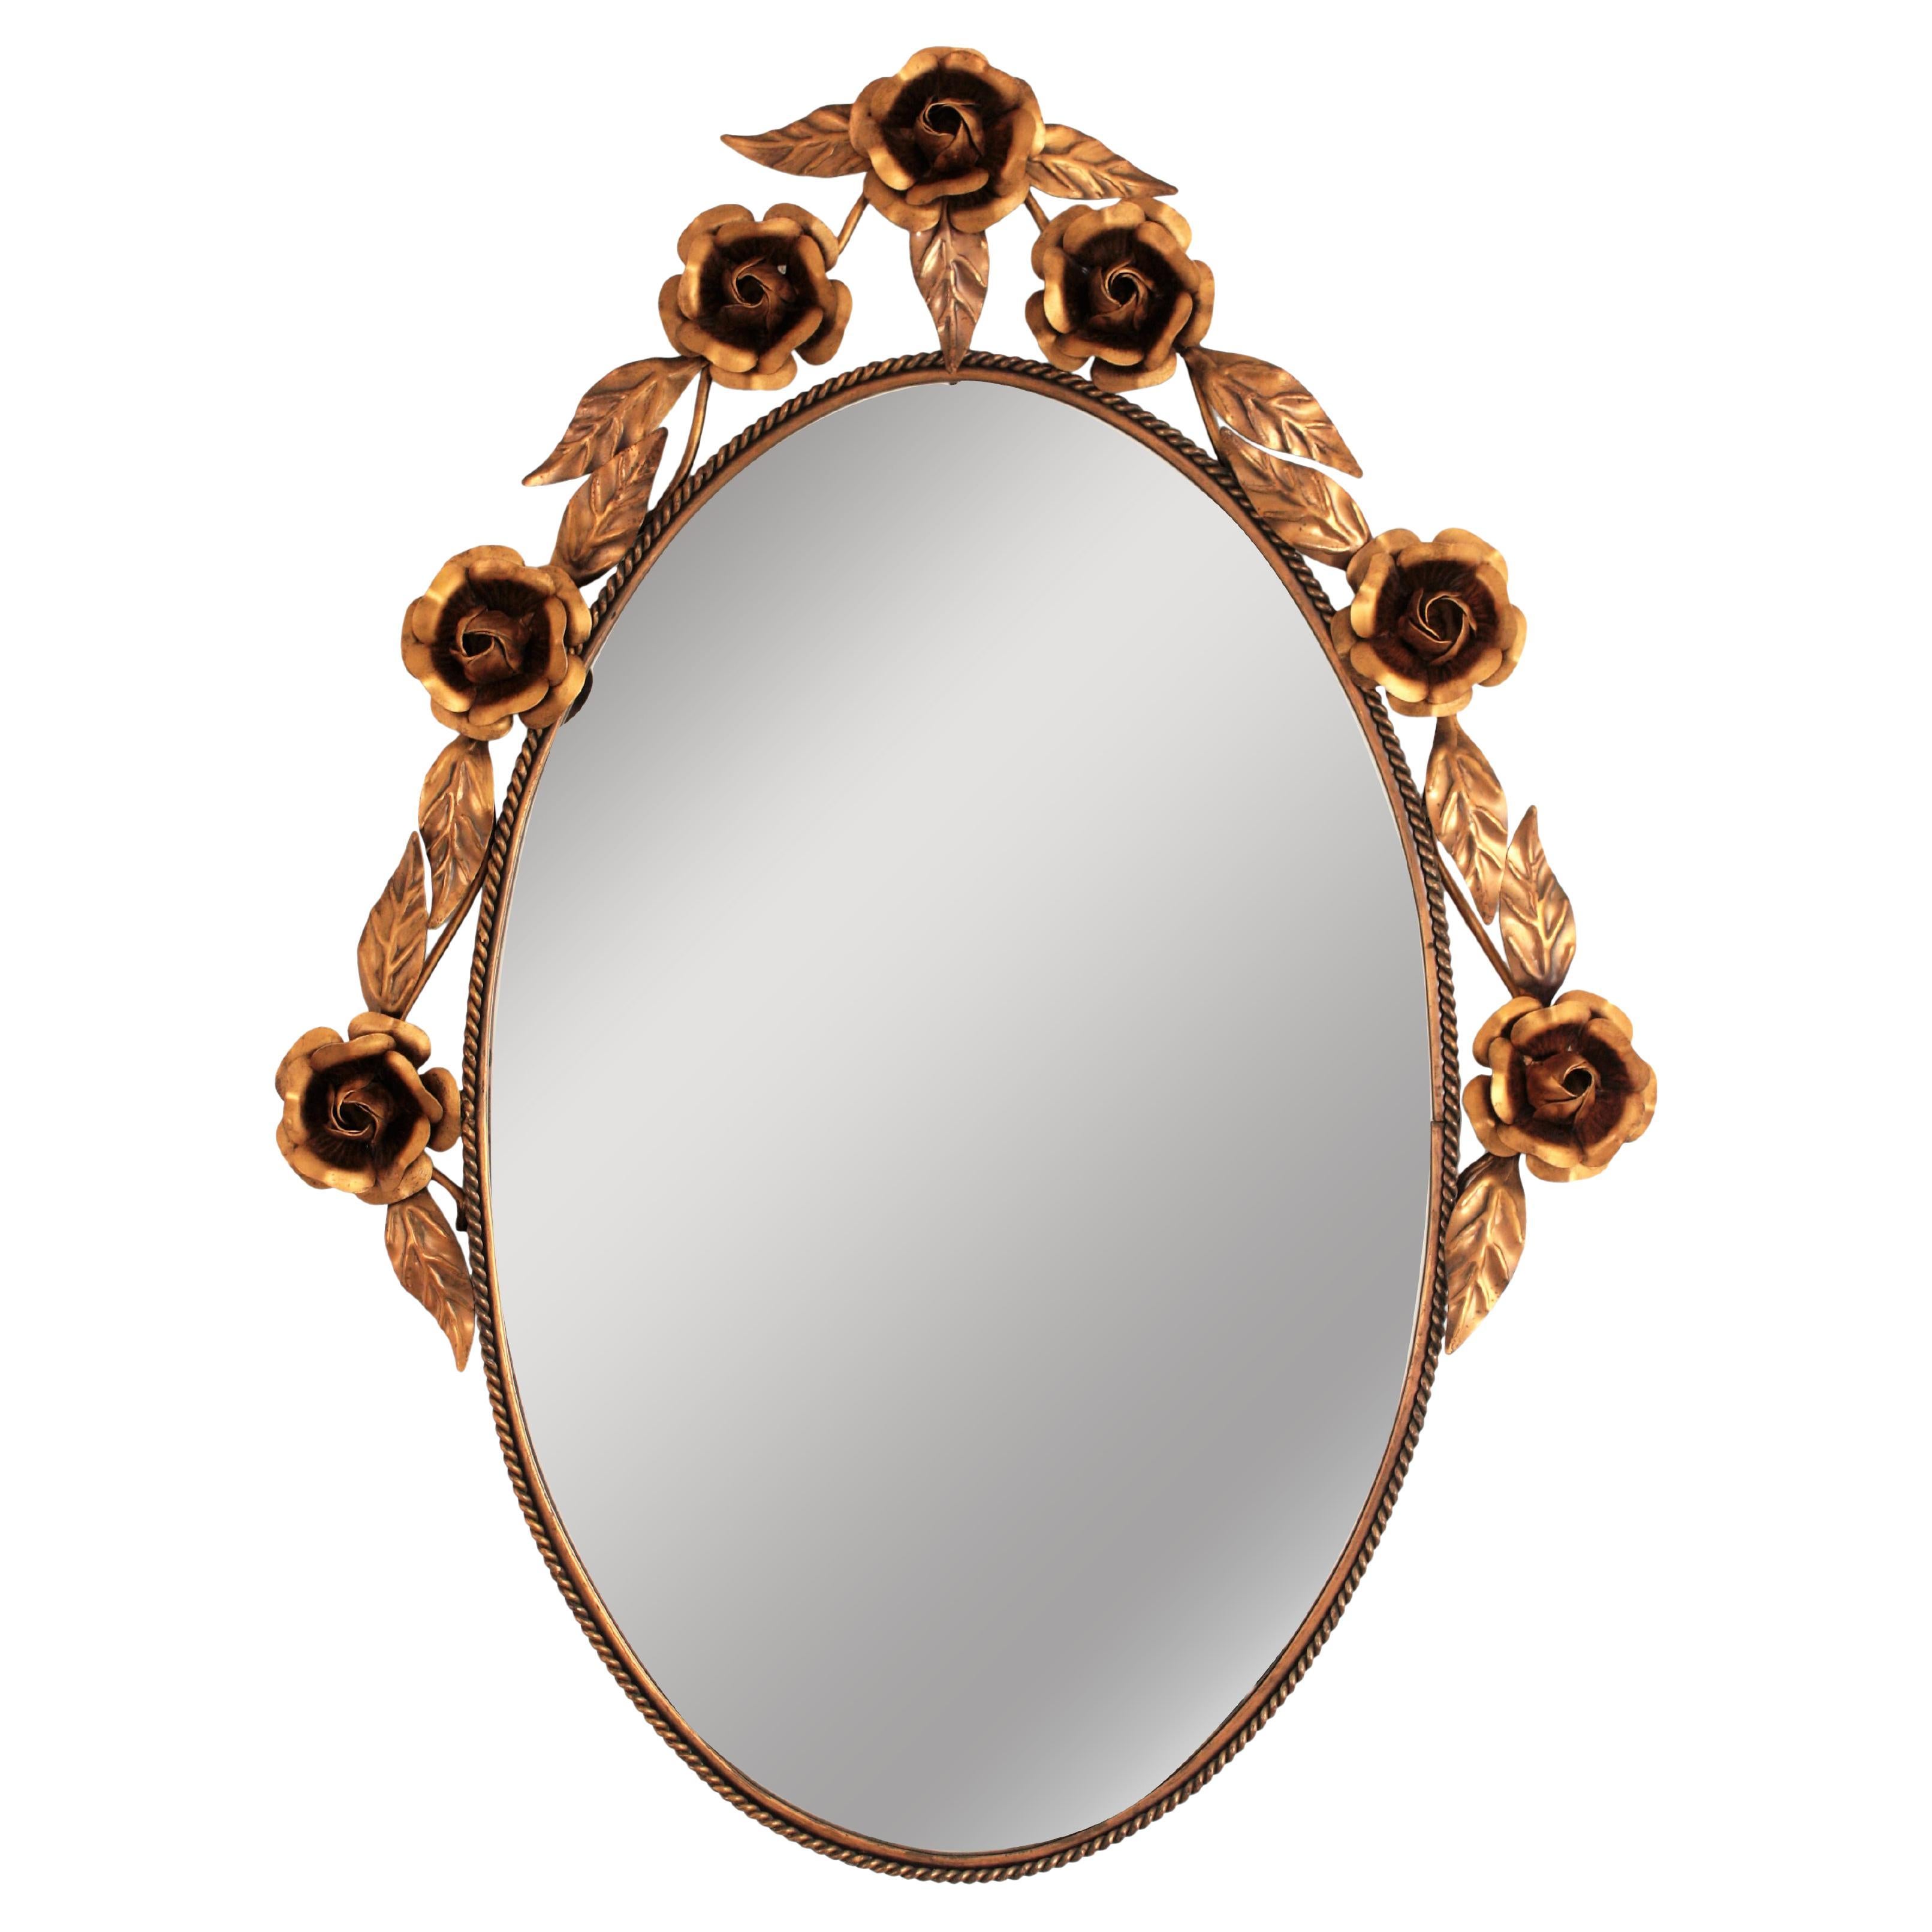 Oval Floral Wall Mirror in Copper, 1960s For Sale